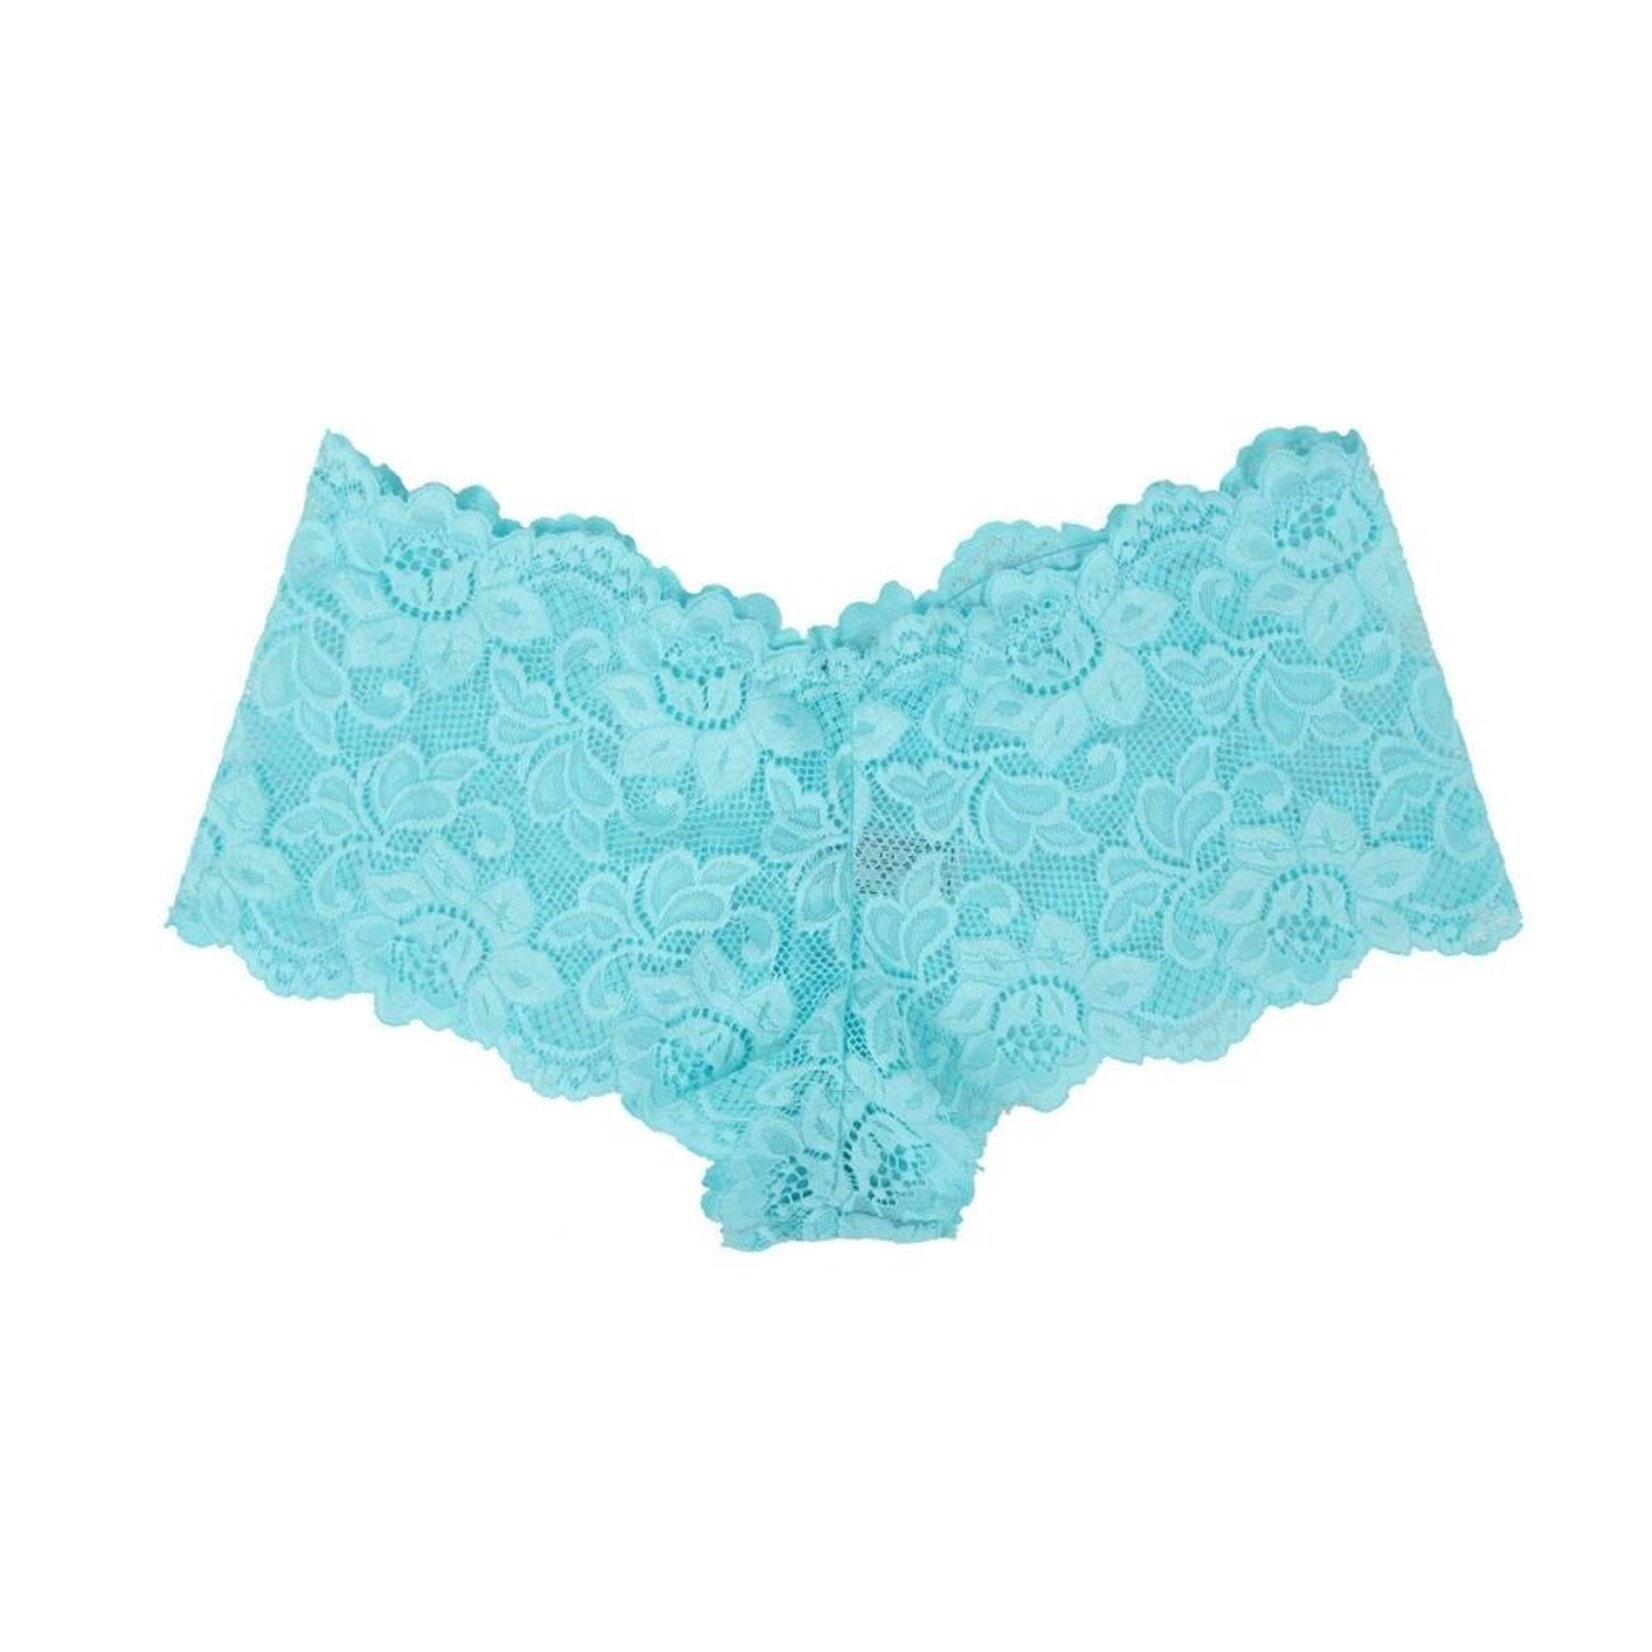 OH YEAH! -  BLUE SEXY FLORAL LACE PANTY 4XL